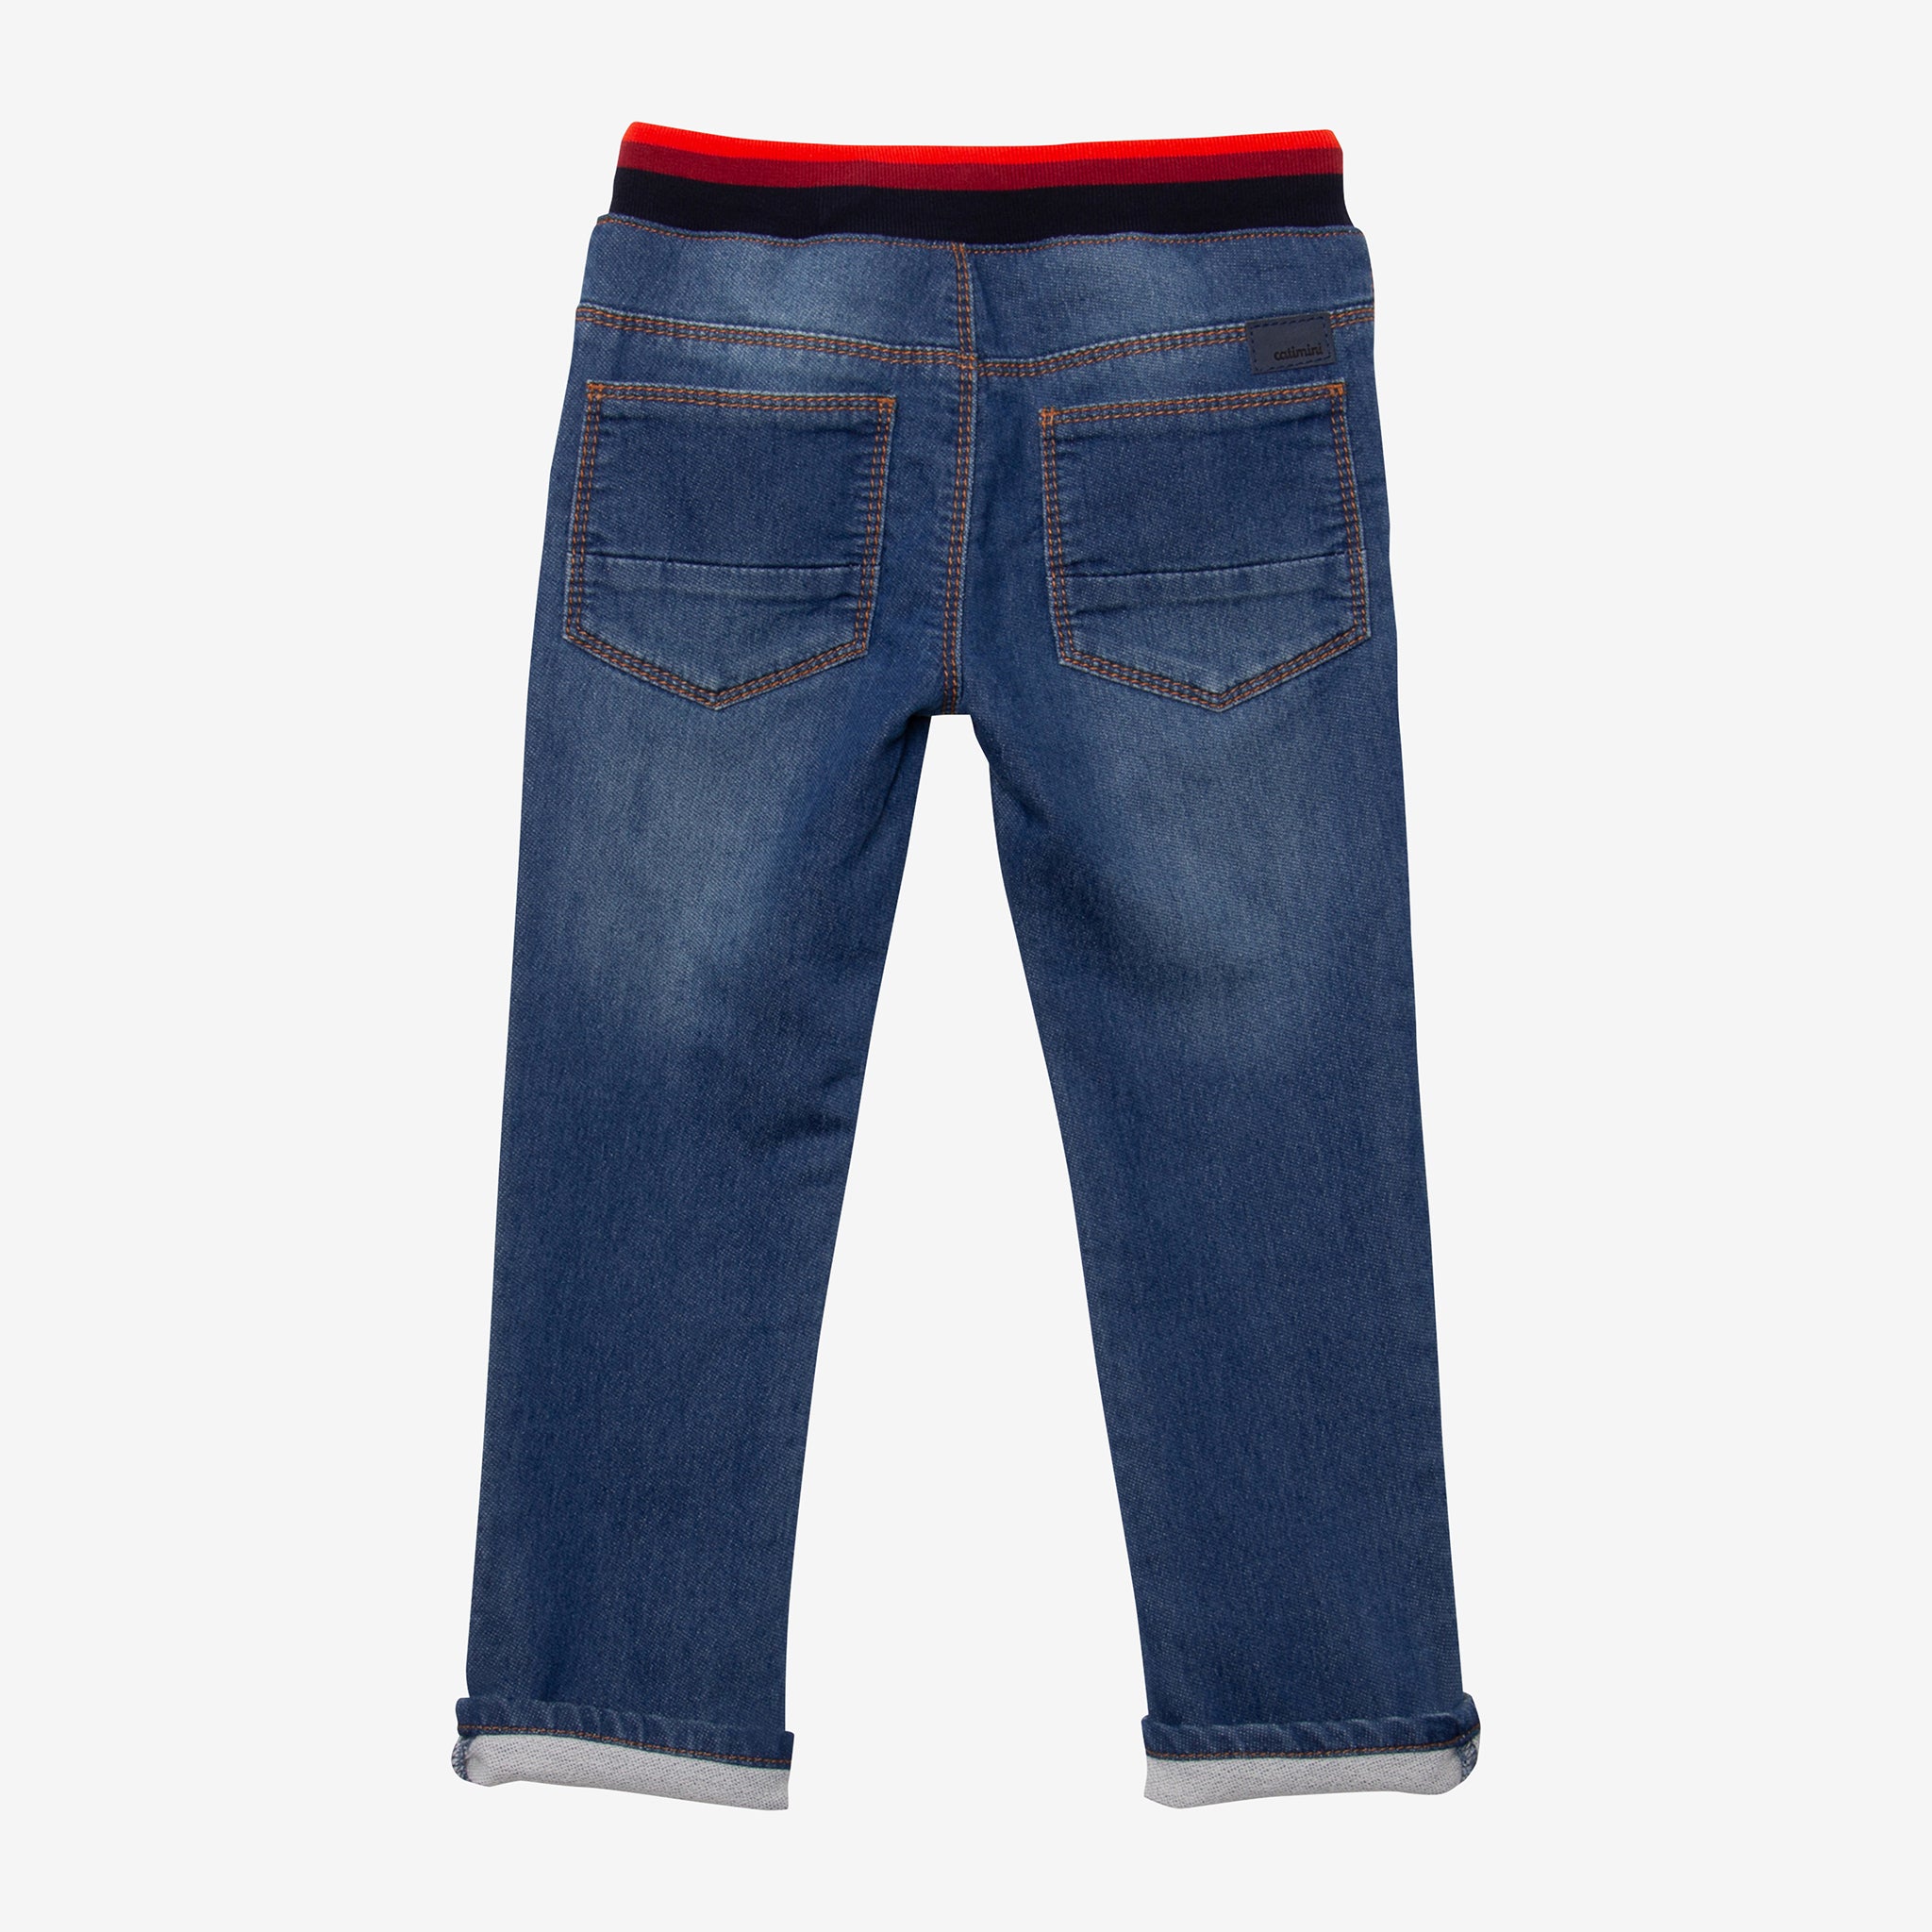 Okie Dokie Baby Boys Straight Pull-On Pants, Color: Dark Wash Denim -  JCPenney